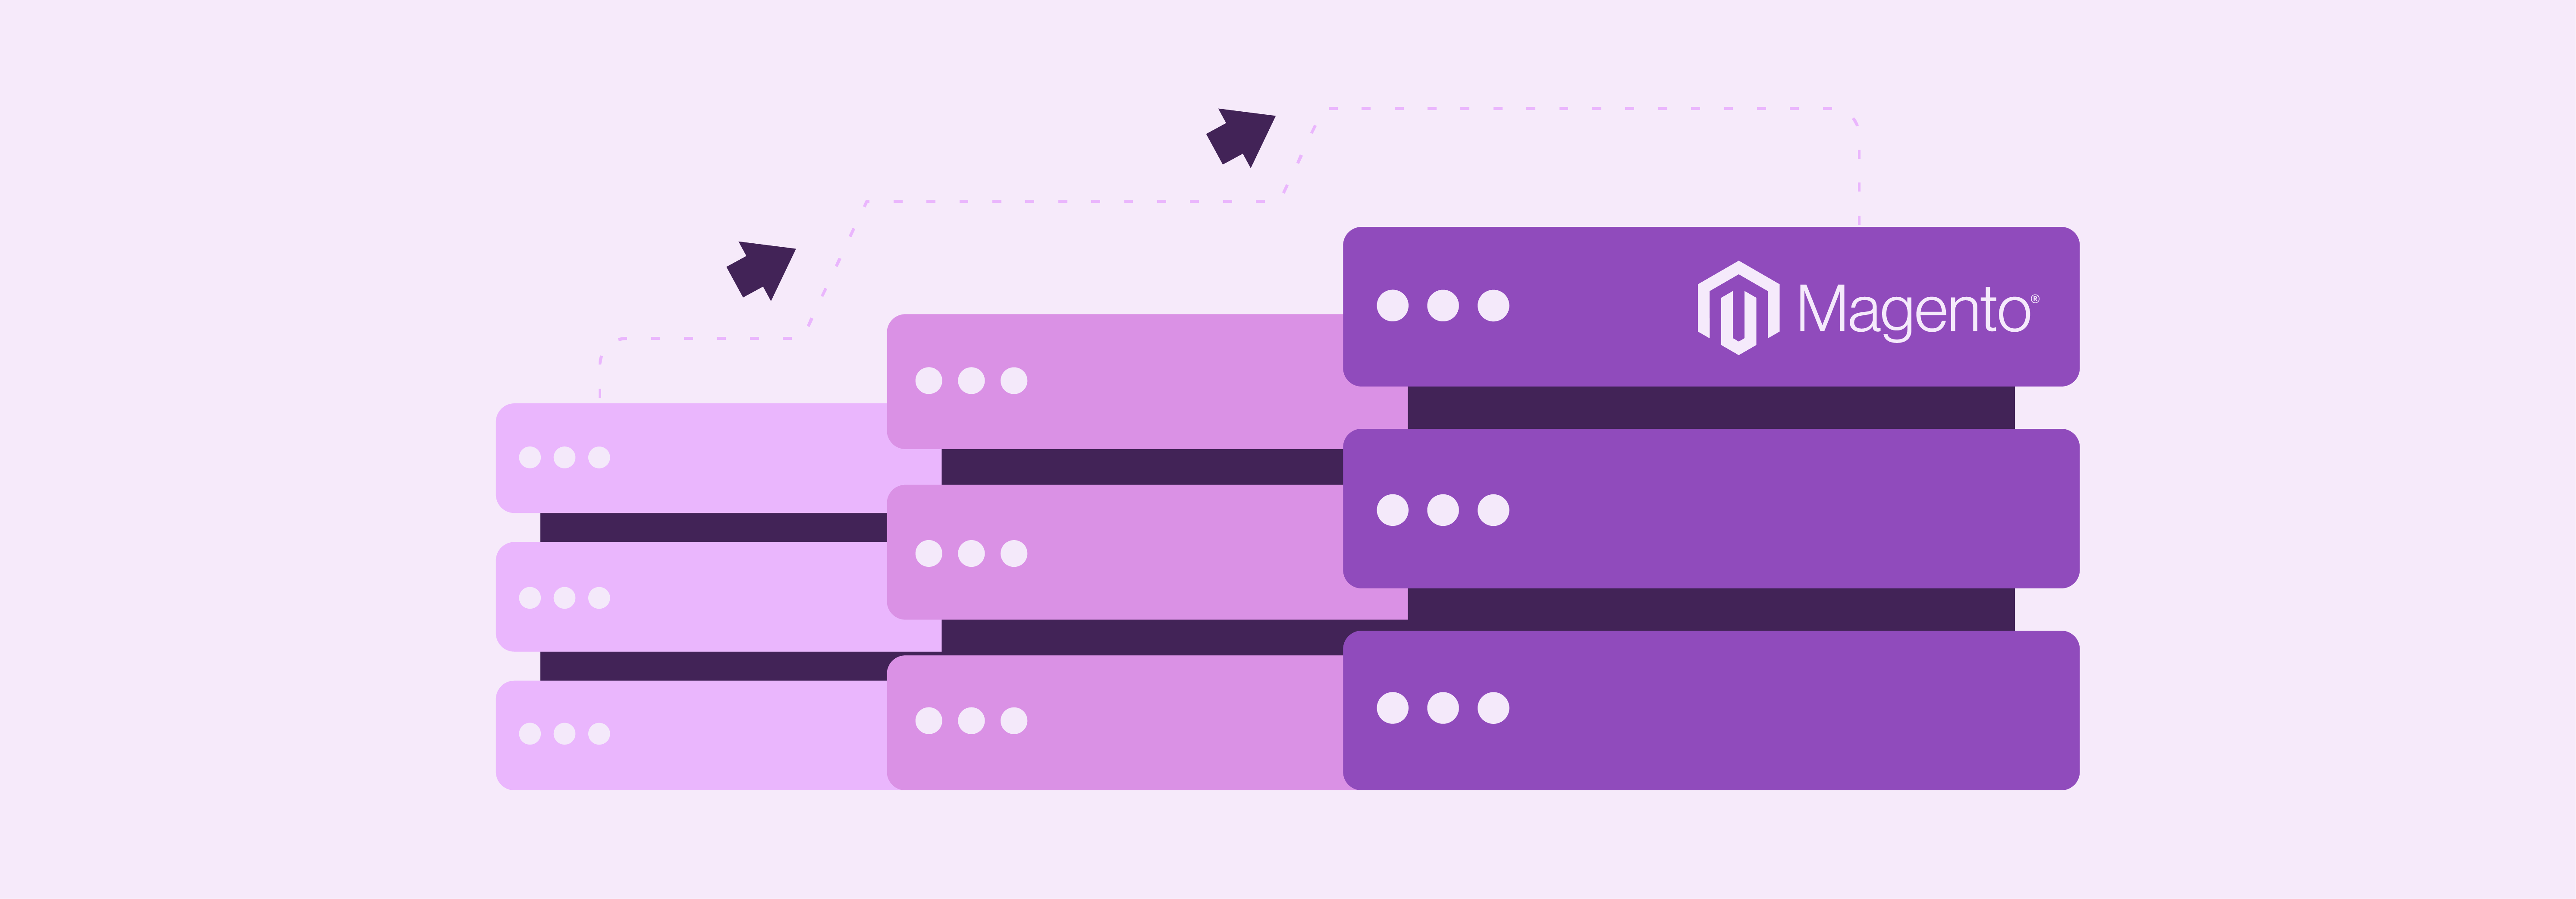 Implementing Nginx for Enhanced Magento Hosting - A Step-by-Step Guide